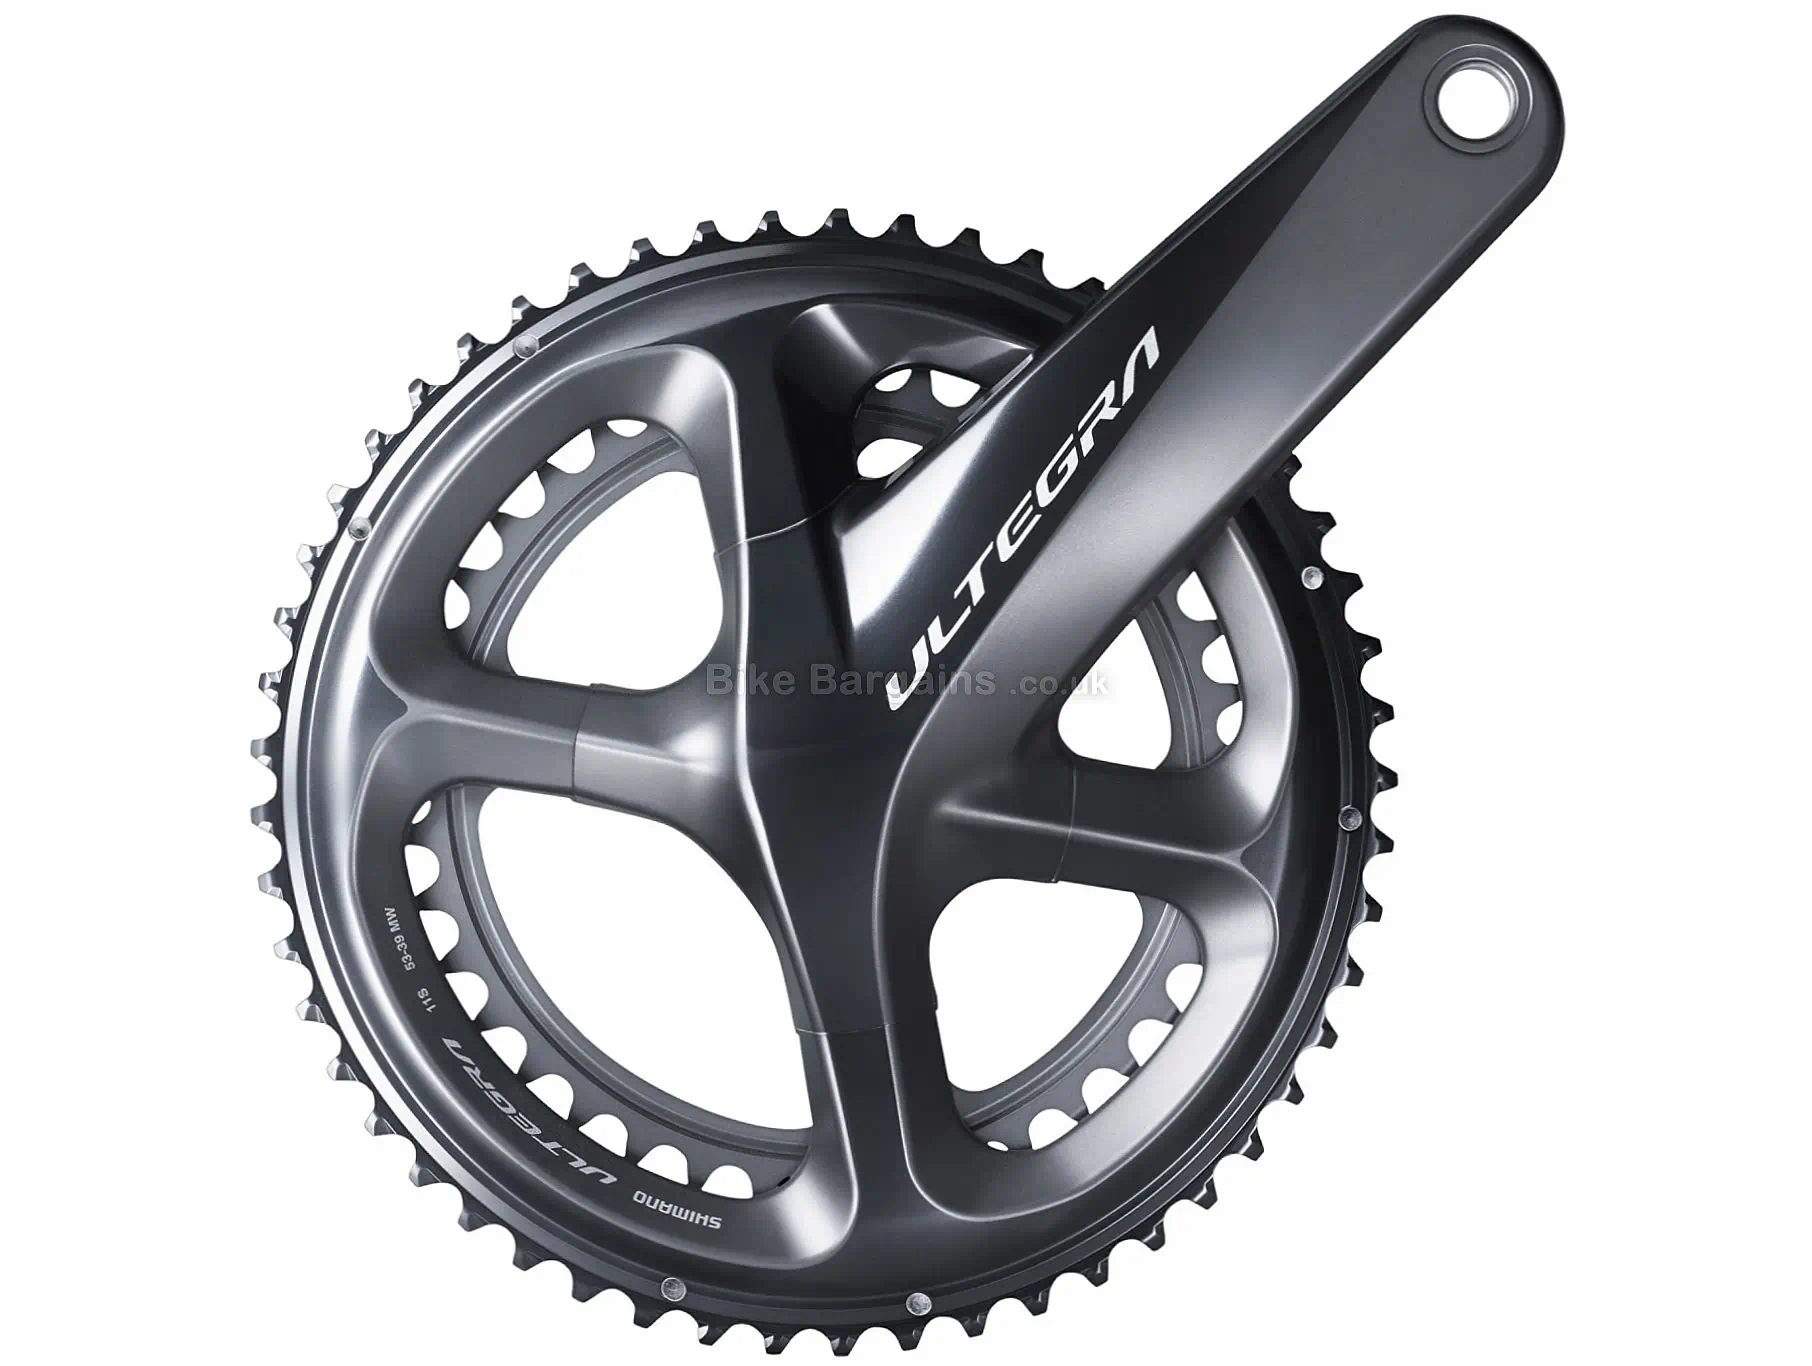 Shimano Ultegra R8000 11 Speed Double Chainset - £120! | Chainsets